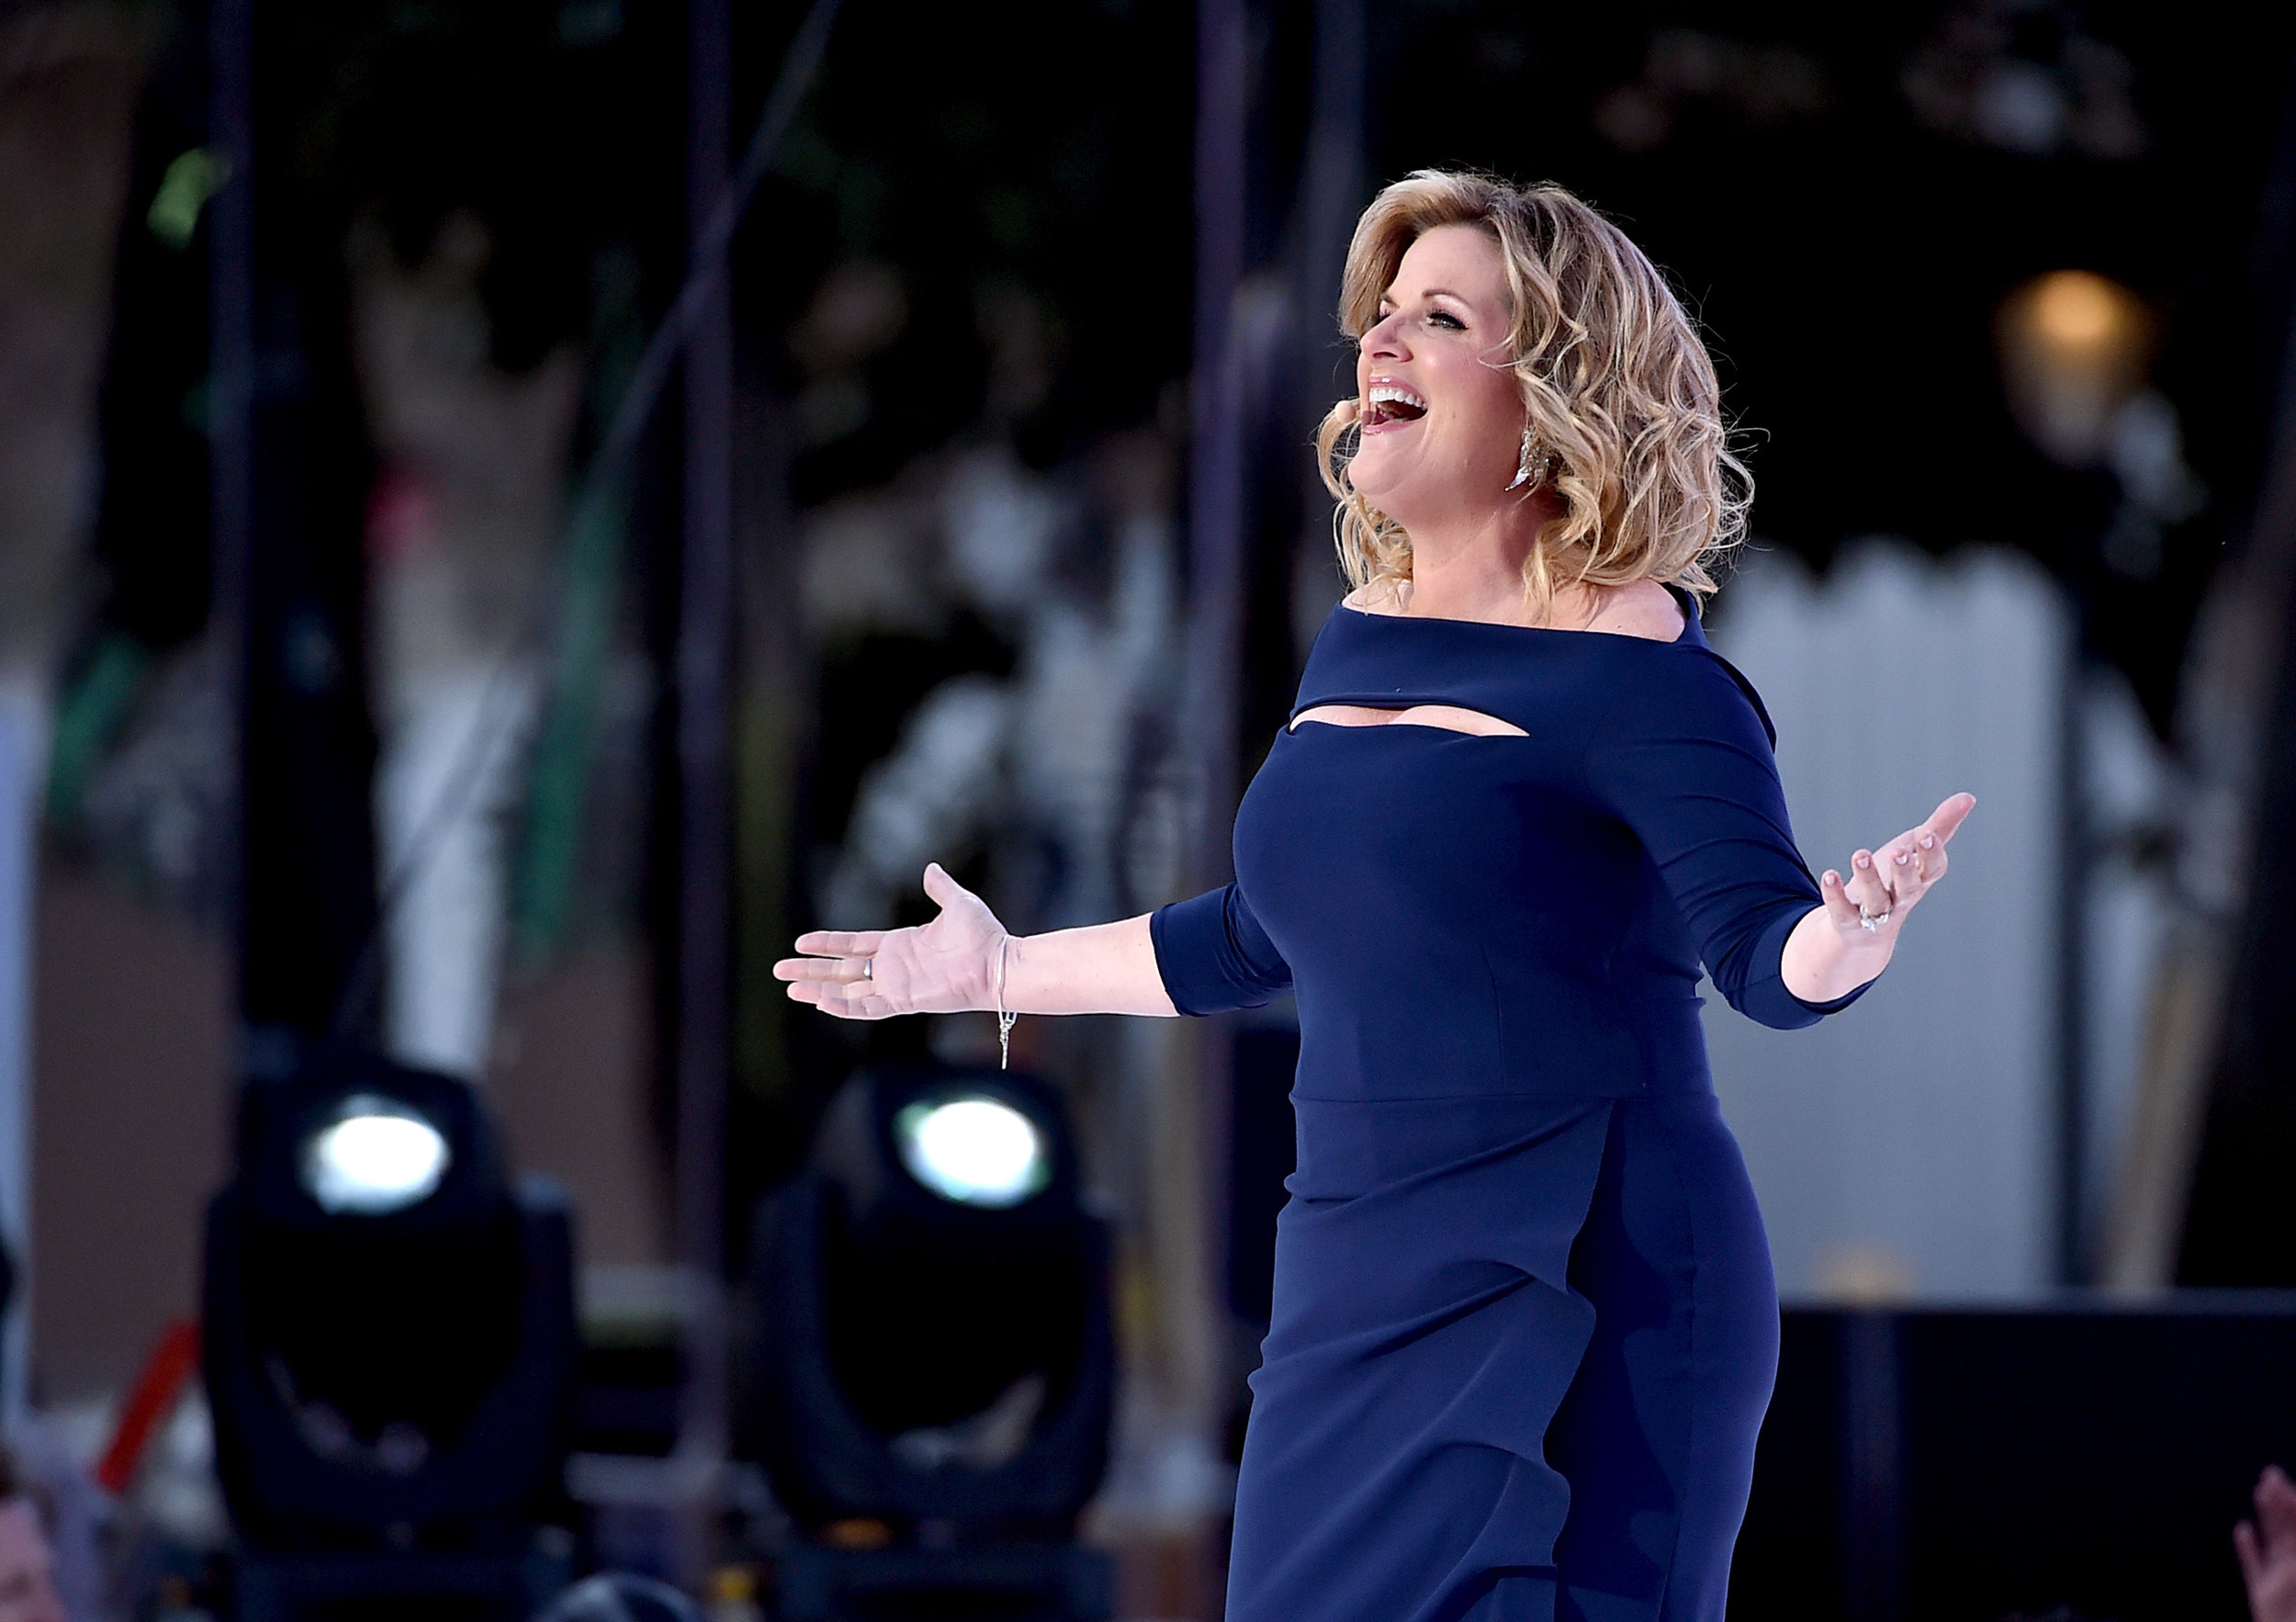 <p>One of the greatest voices of her generation, Trisha Yearwood stormed onto the scene in 1985 and country music hasn’t been the same since. She’s sold millions of records and charted dozens of hits, including the crossover smash “How Do I Live” and “She’s In Love With The Boy.” </p><p><a href='https://www.msn.com/en-us/community/channel/vid-cj9pqbr0vn9in2b6ddcd8sfgpfq6x6utp44fssrv6mc2gtybw0us'>Follow us on MSN to see more of our exclusive entertainment content.</a></p>